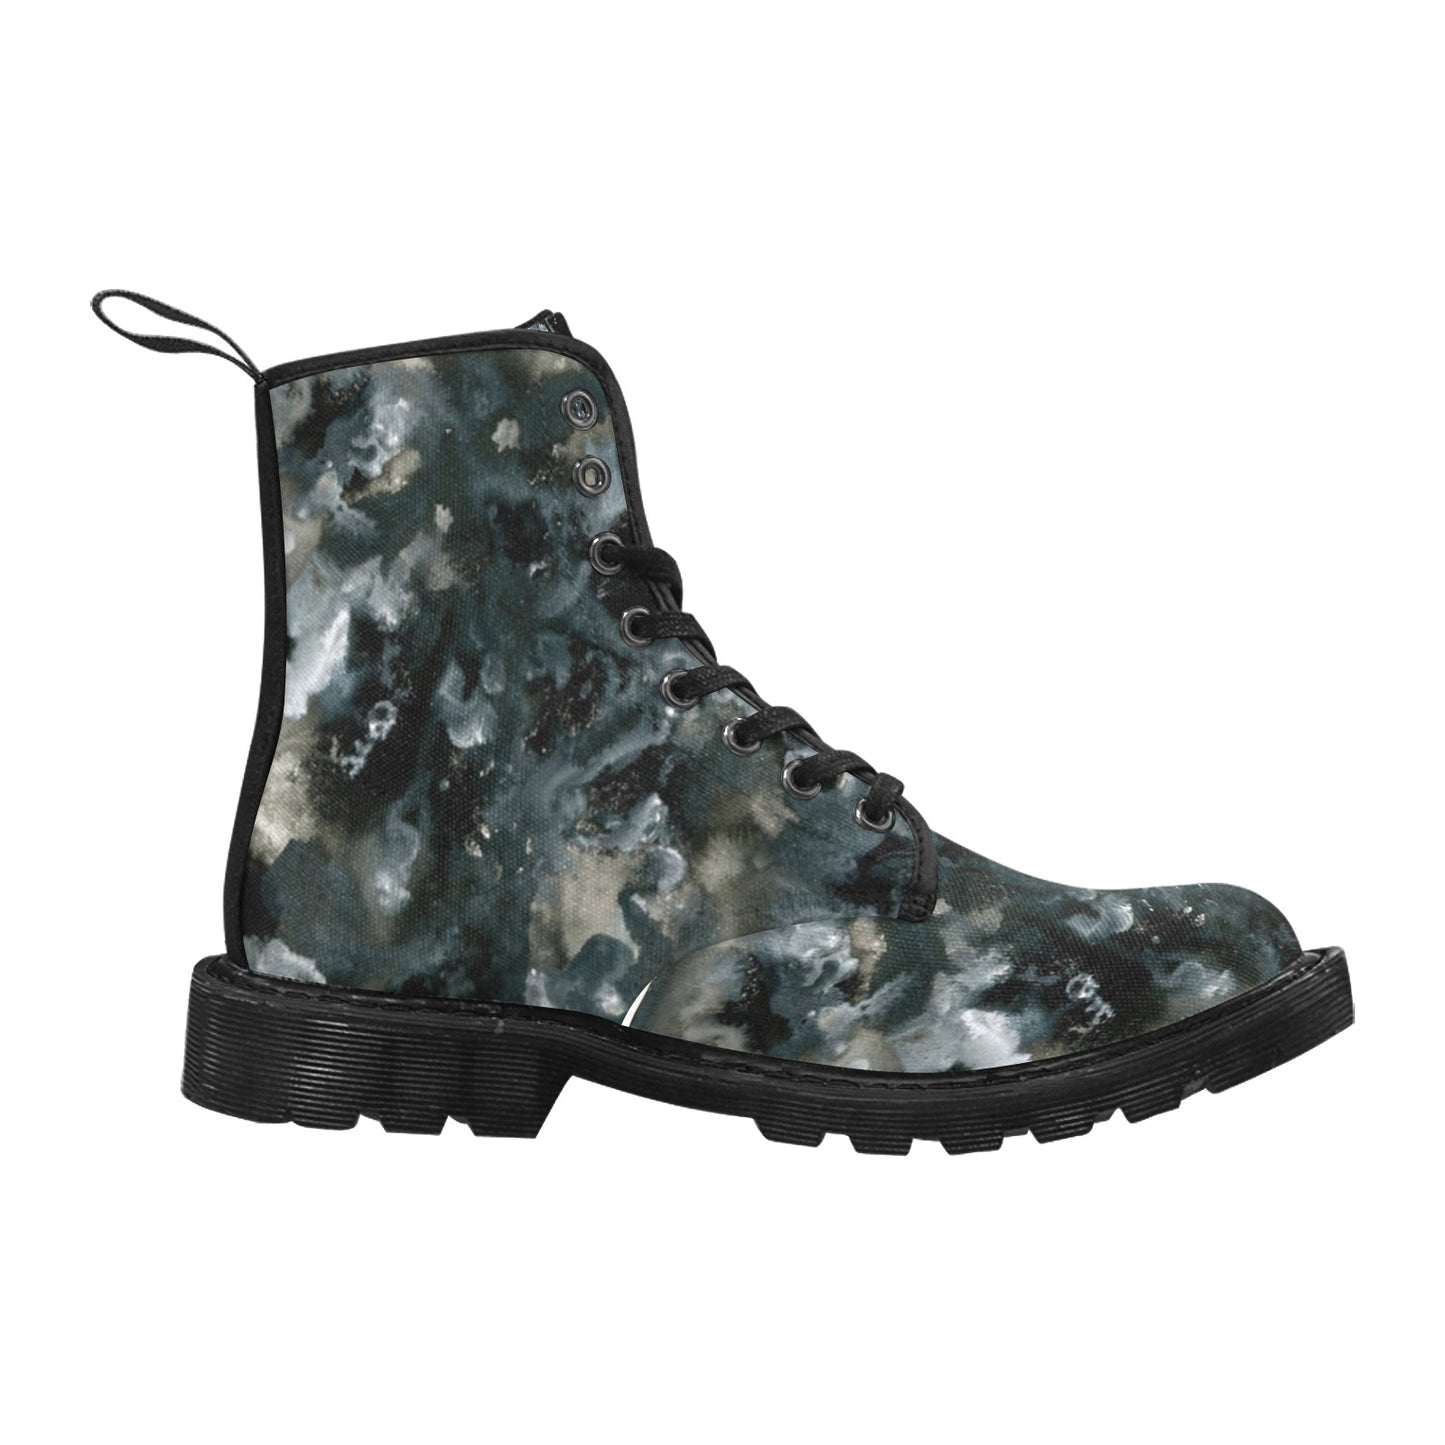 Inked Camo Boots for Women